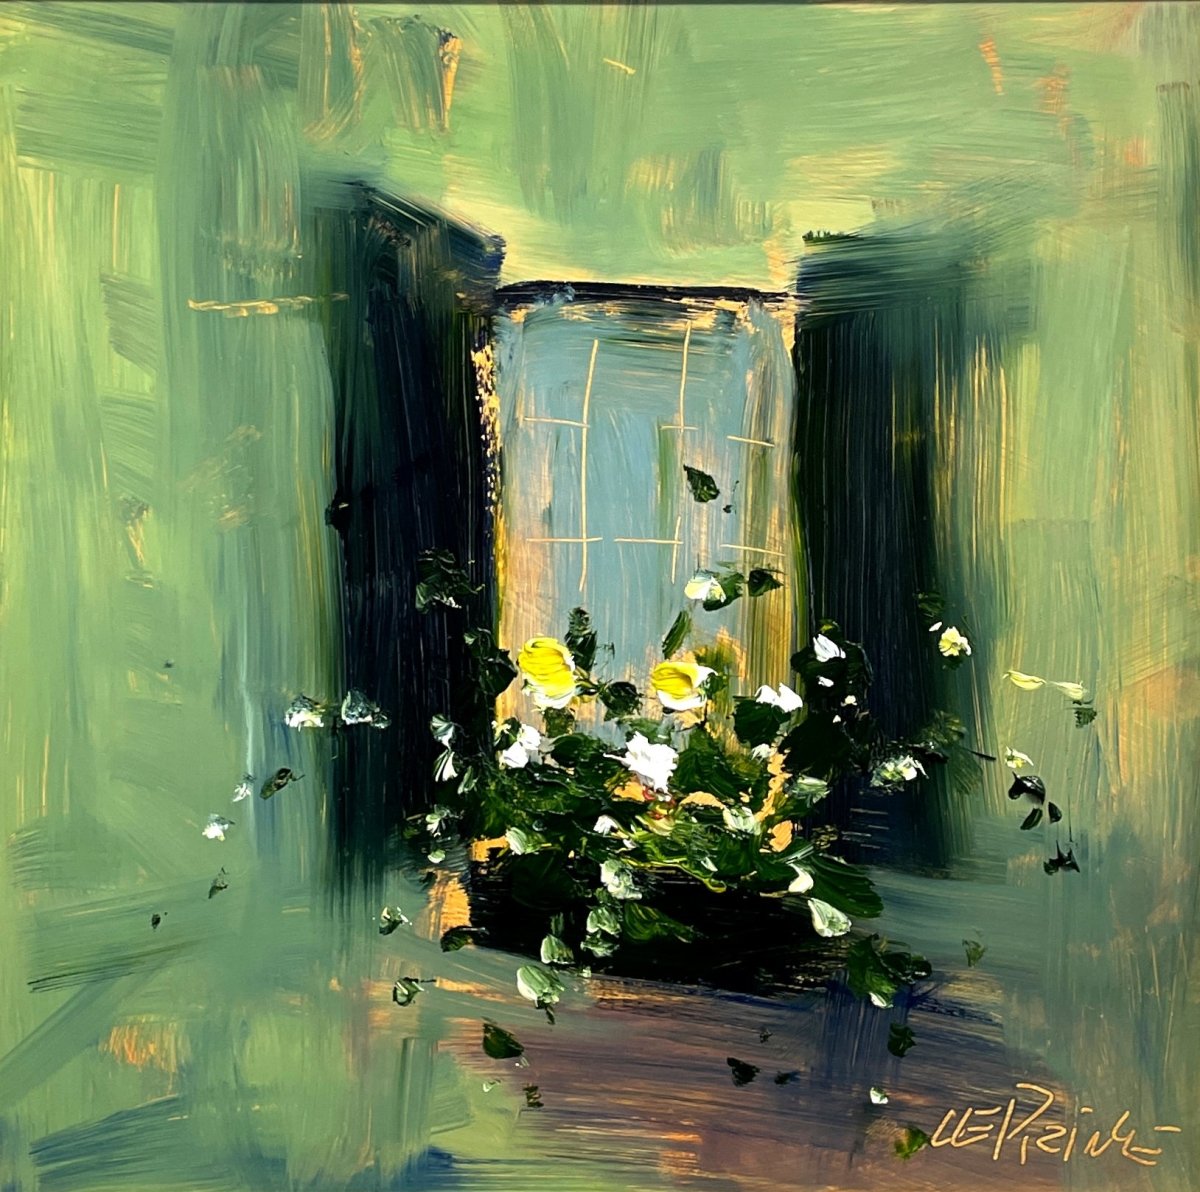 Window Box Study II by Kevin LePrince at LePrince Galleries